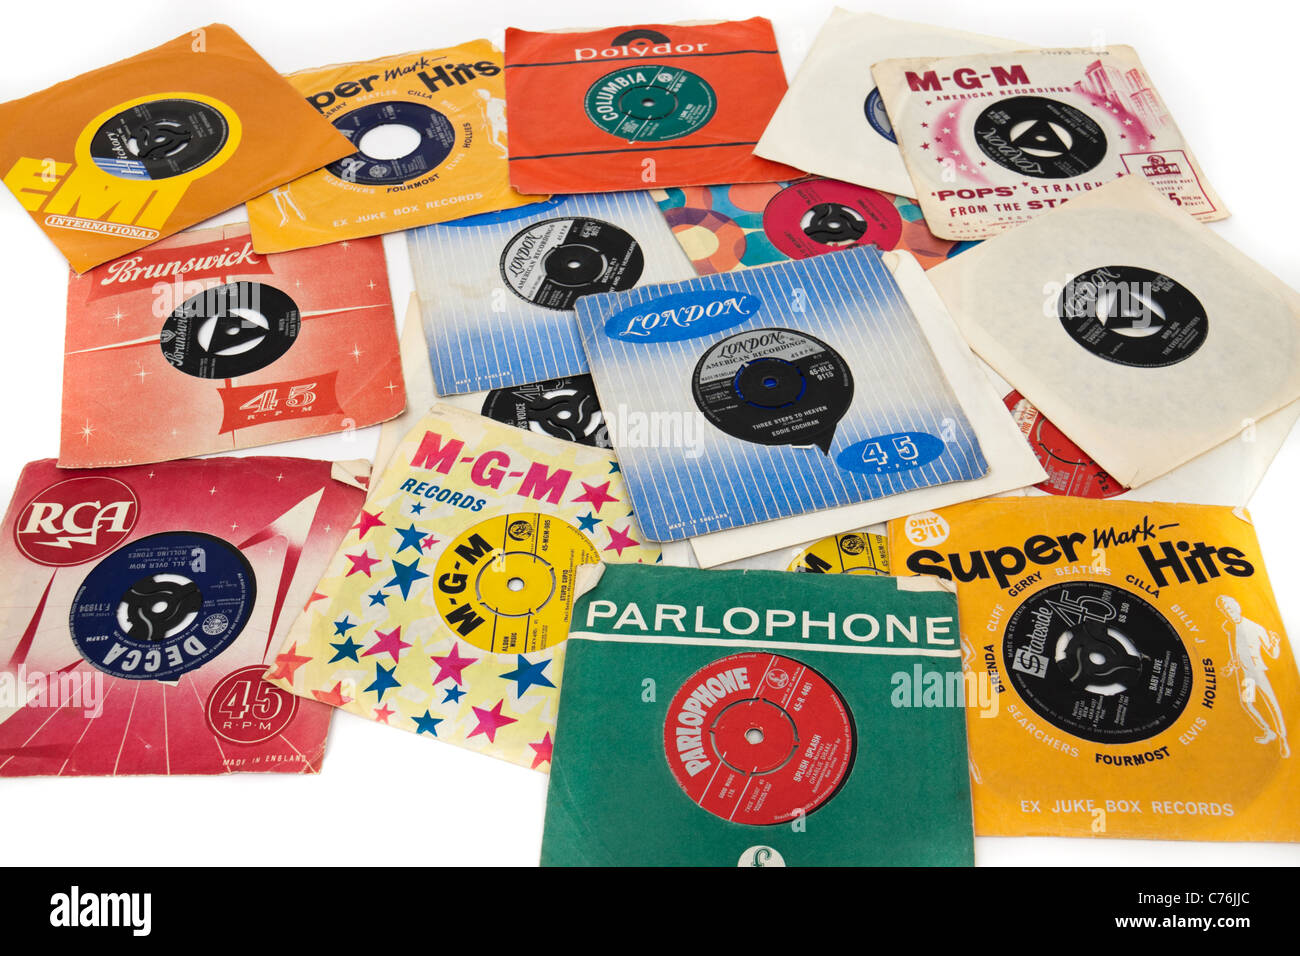 1960s Vinyl High Resolution Stock Photography and Images - Alamy